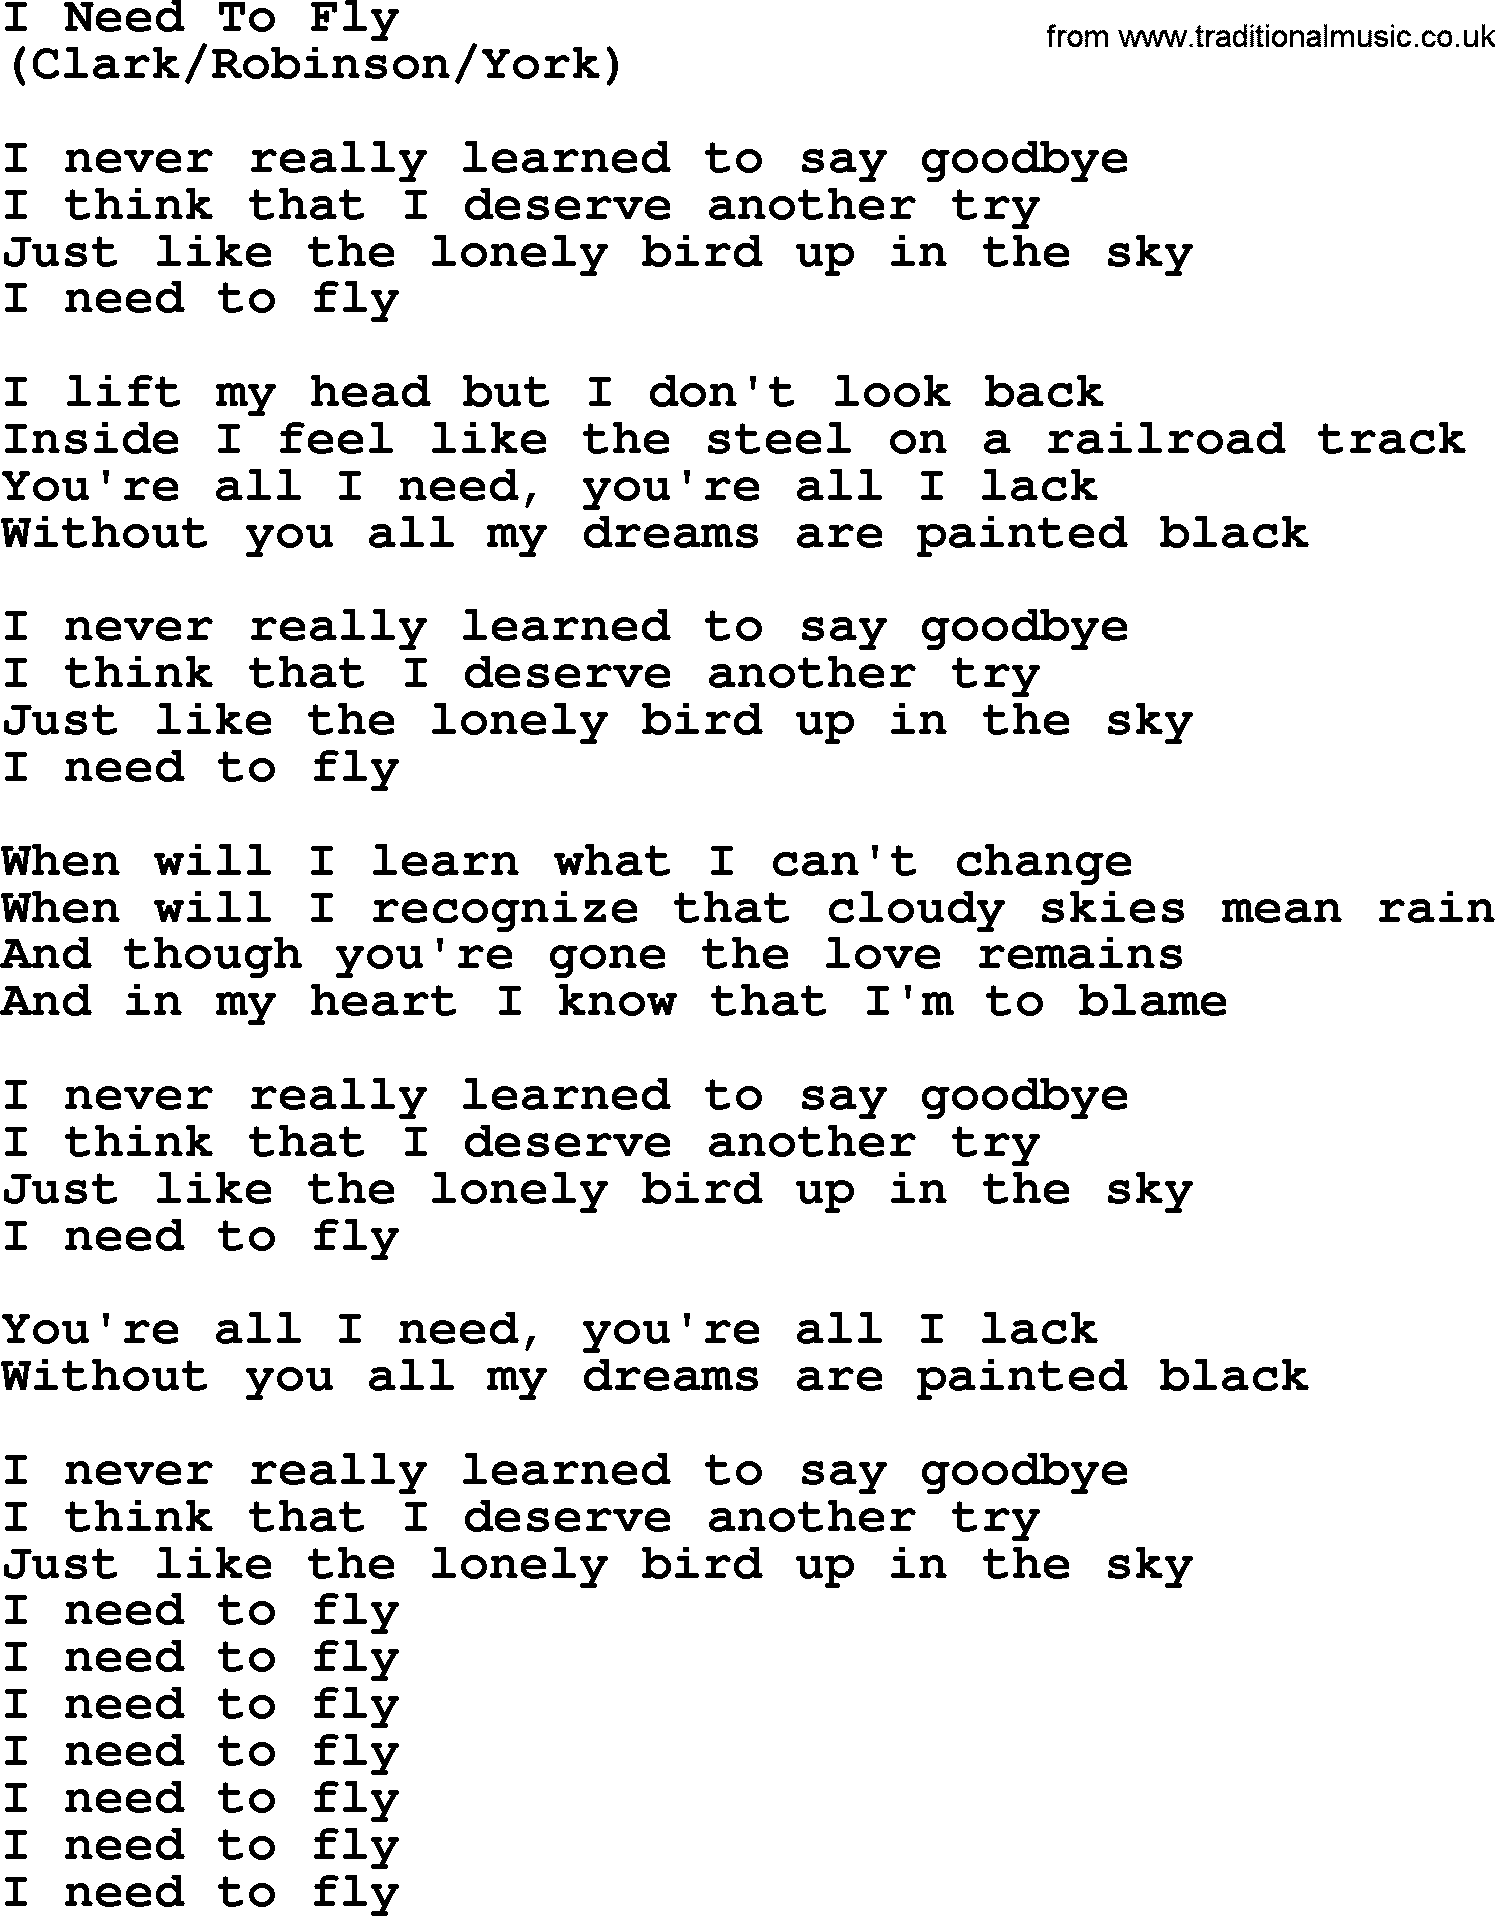 The Byrds song I Need To Fly, lyrics